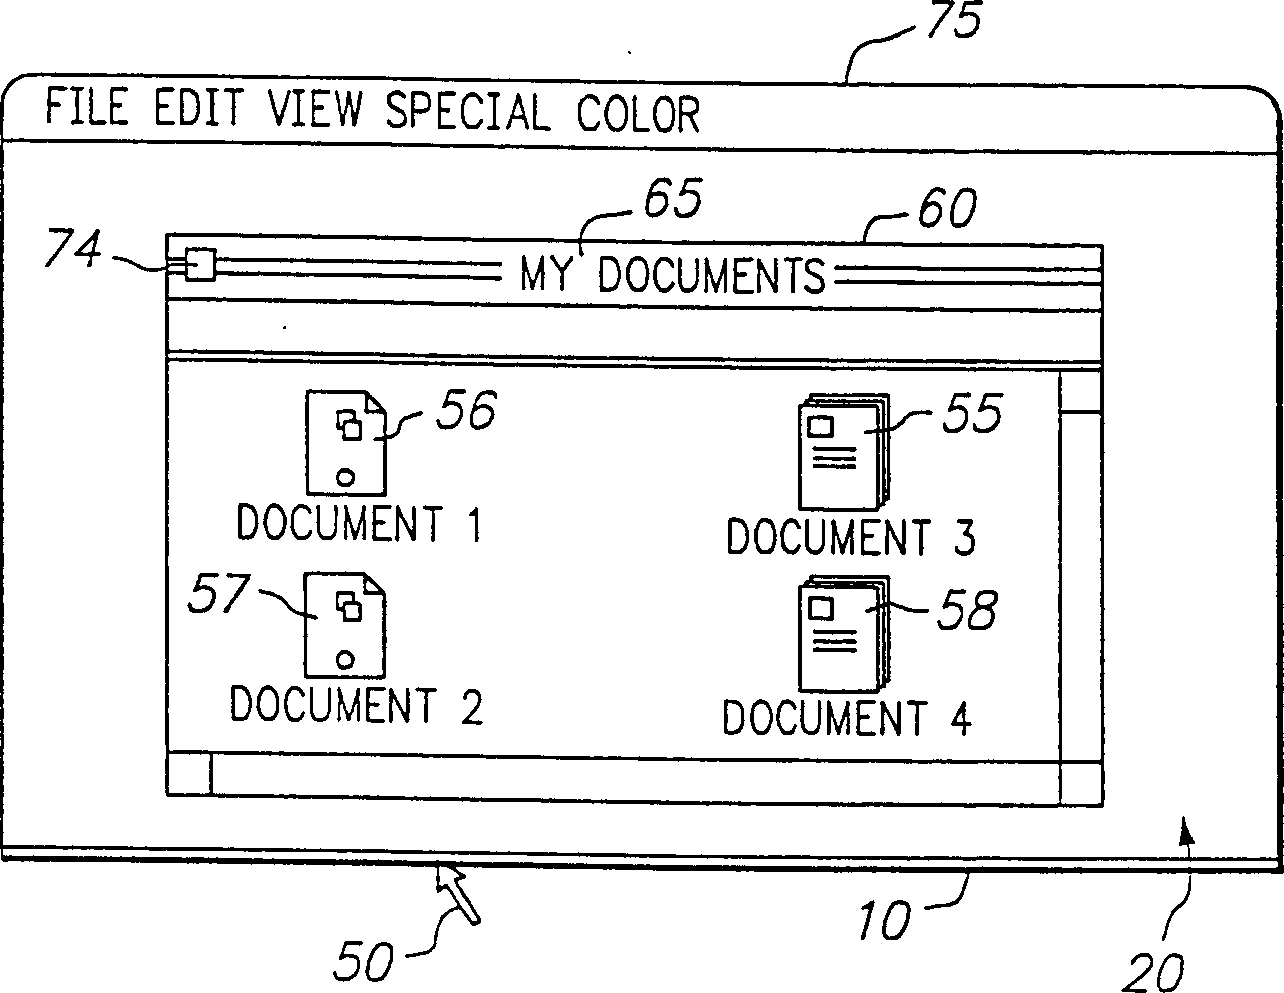 User interface for providing consolidation and access